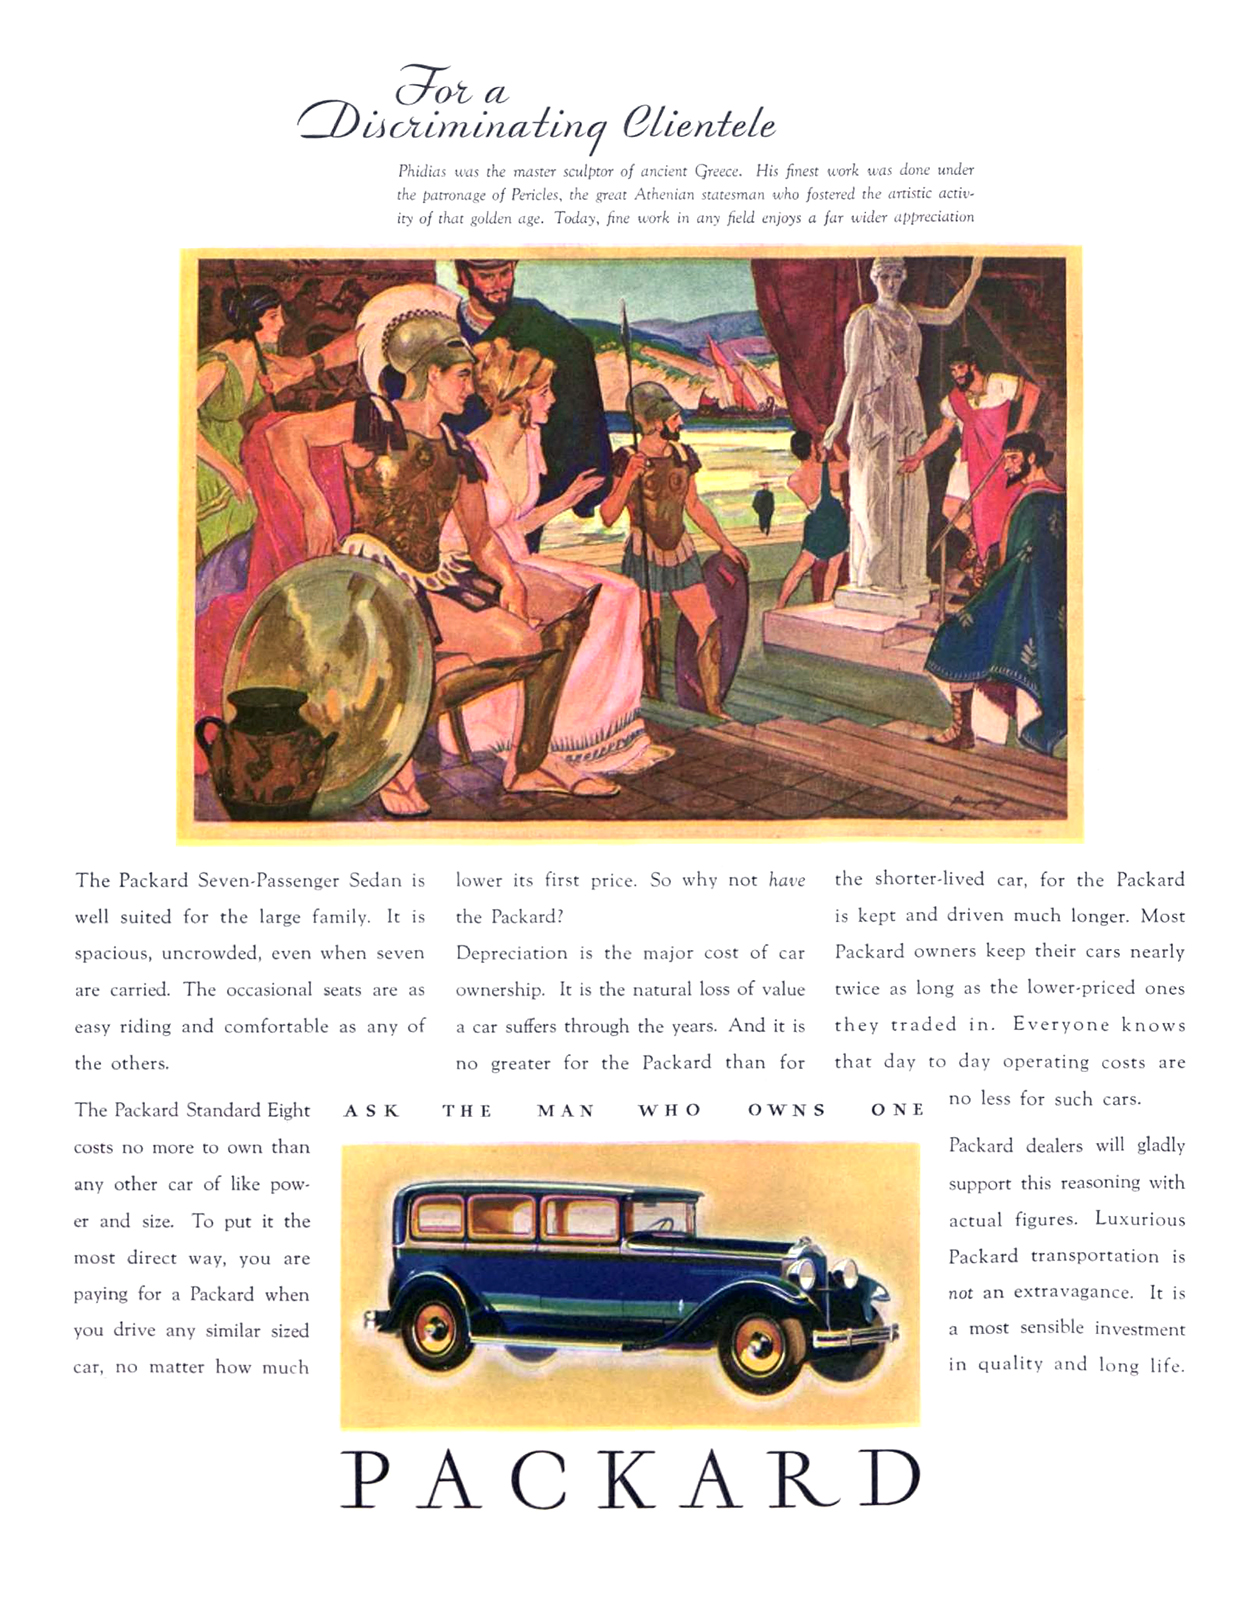 Packard Ad (January, 1931) – Phidias was the master sculptor of ancient Greece. His finest work was done under the patronage of Pericles, the great Athenian statesman who fostered the artistic activity of that golden age. Today, fine work in any field enjoys a far wider appreciation